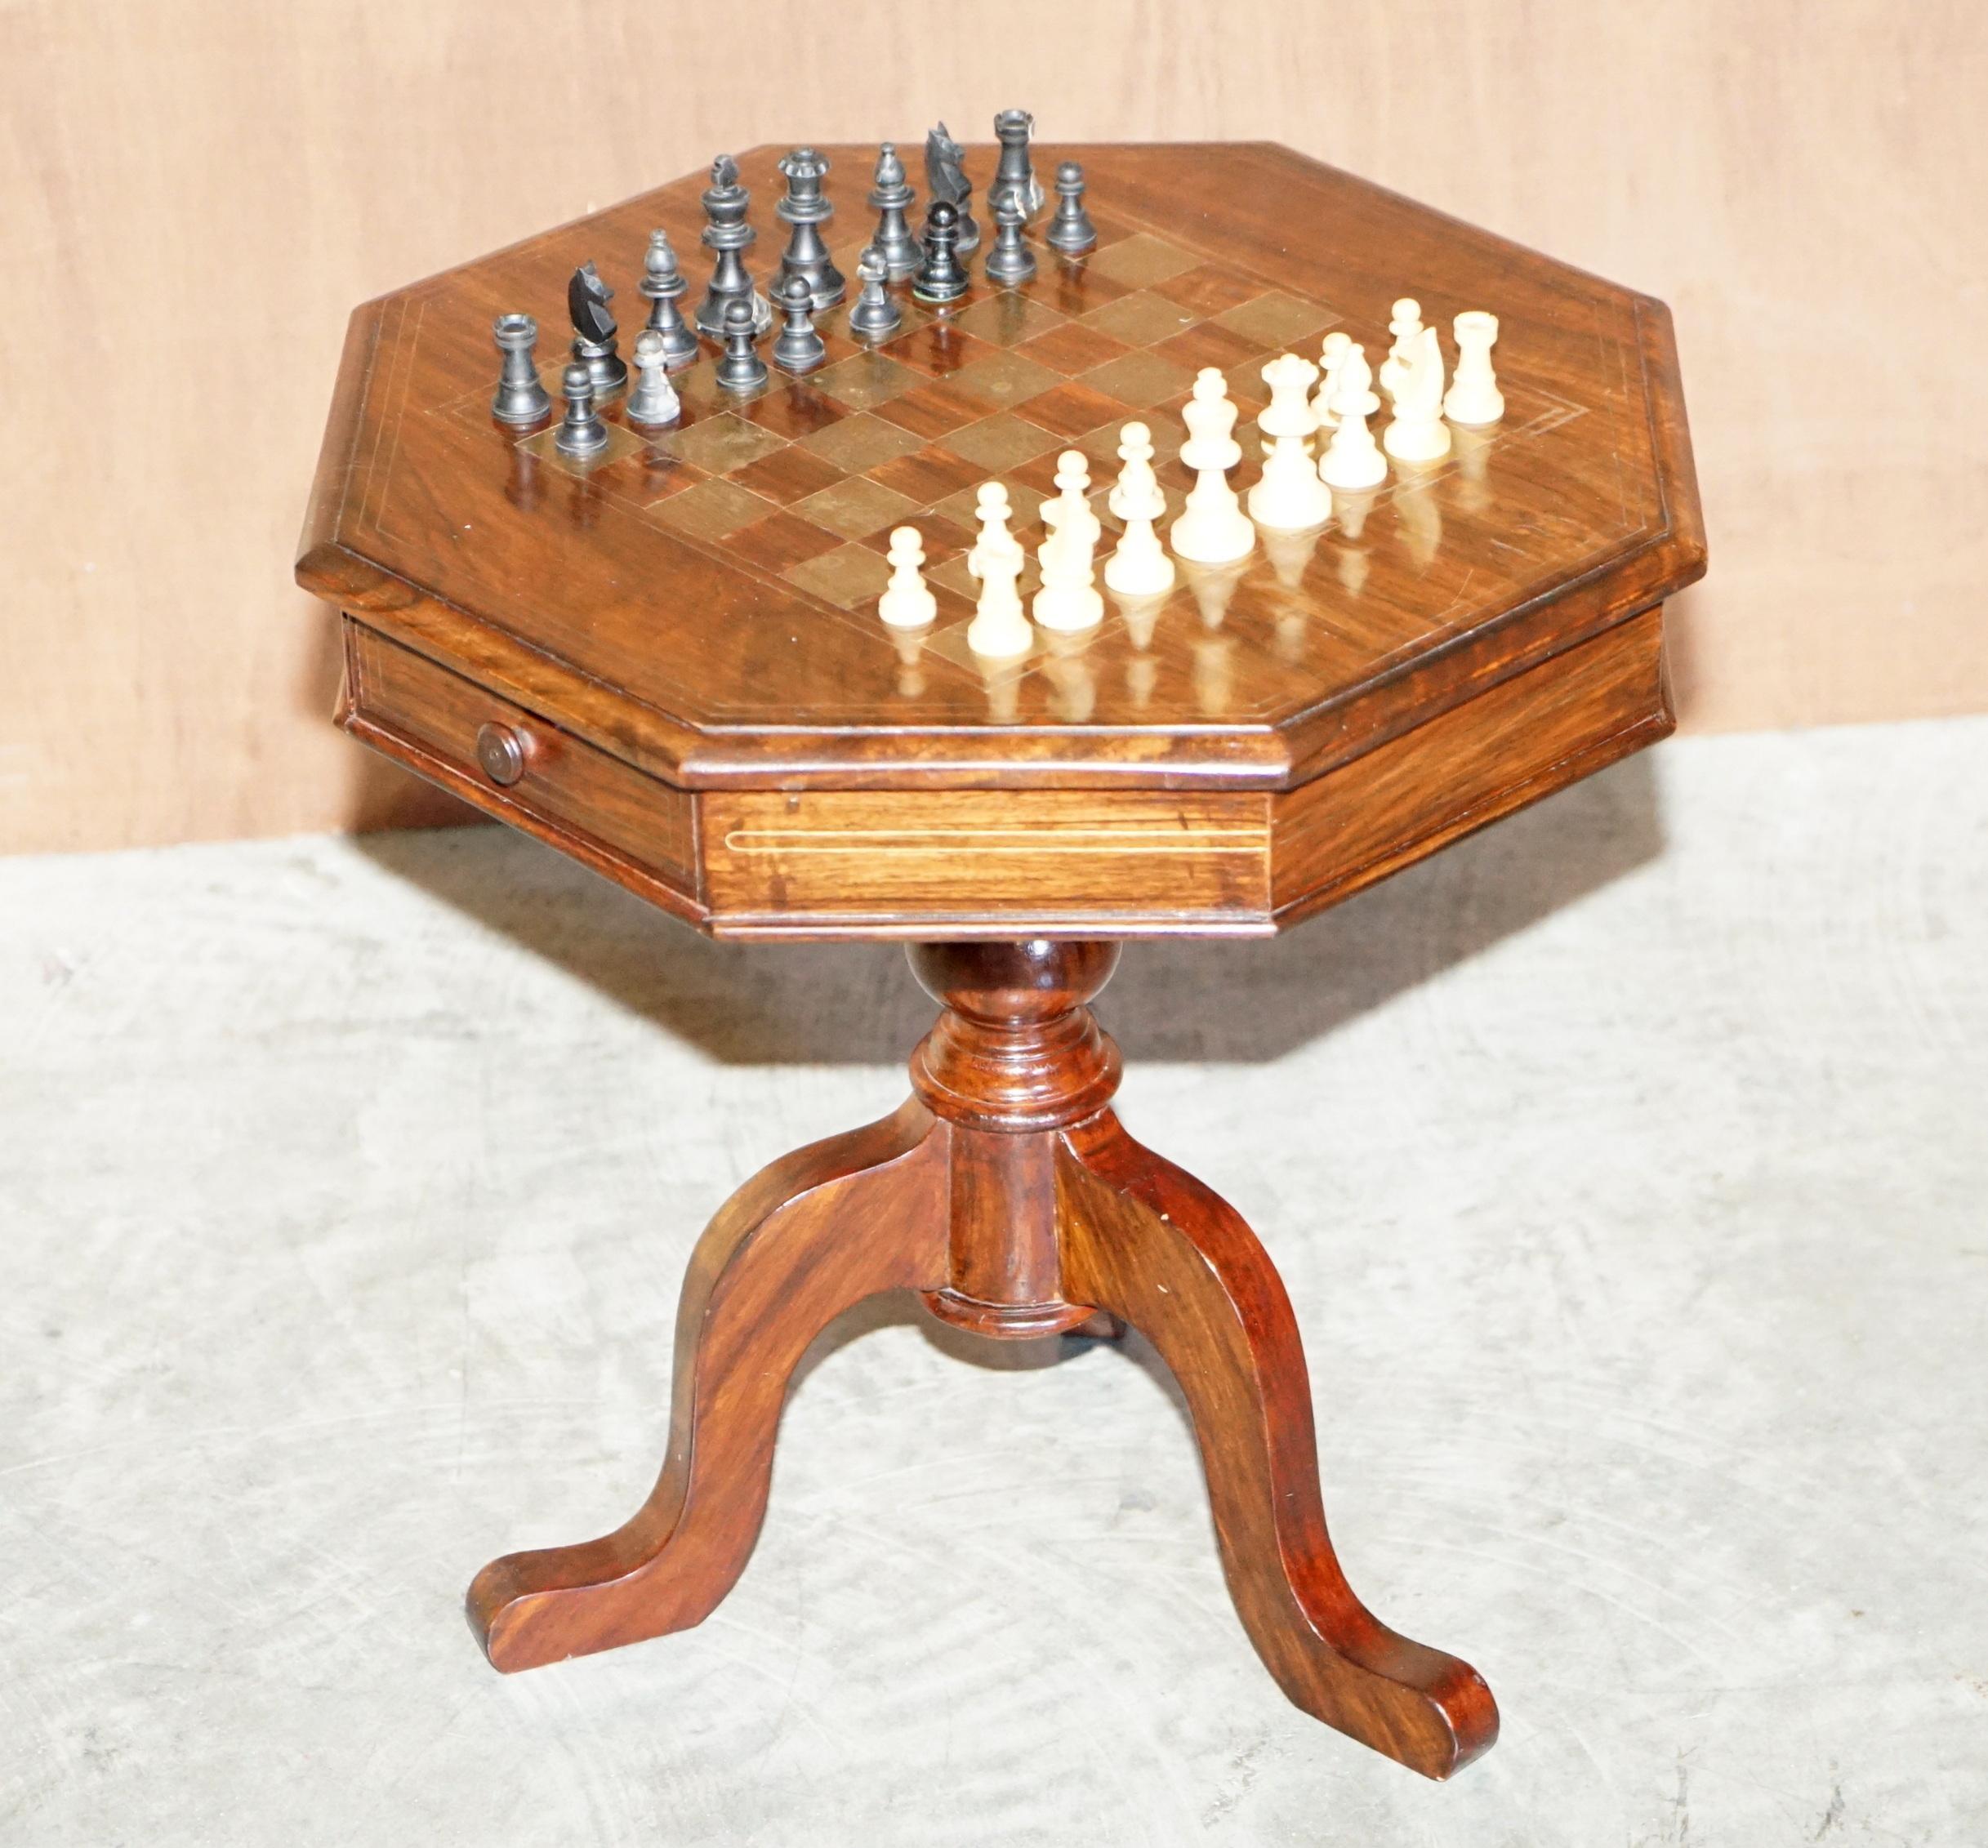 Antique Victorain Hardwood Brass Inlaid Chess Games Table with Staunton Pieces 3